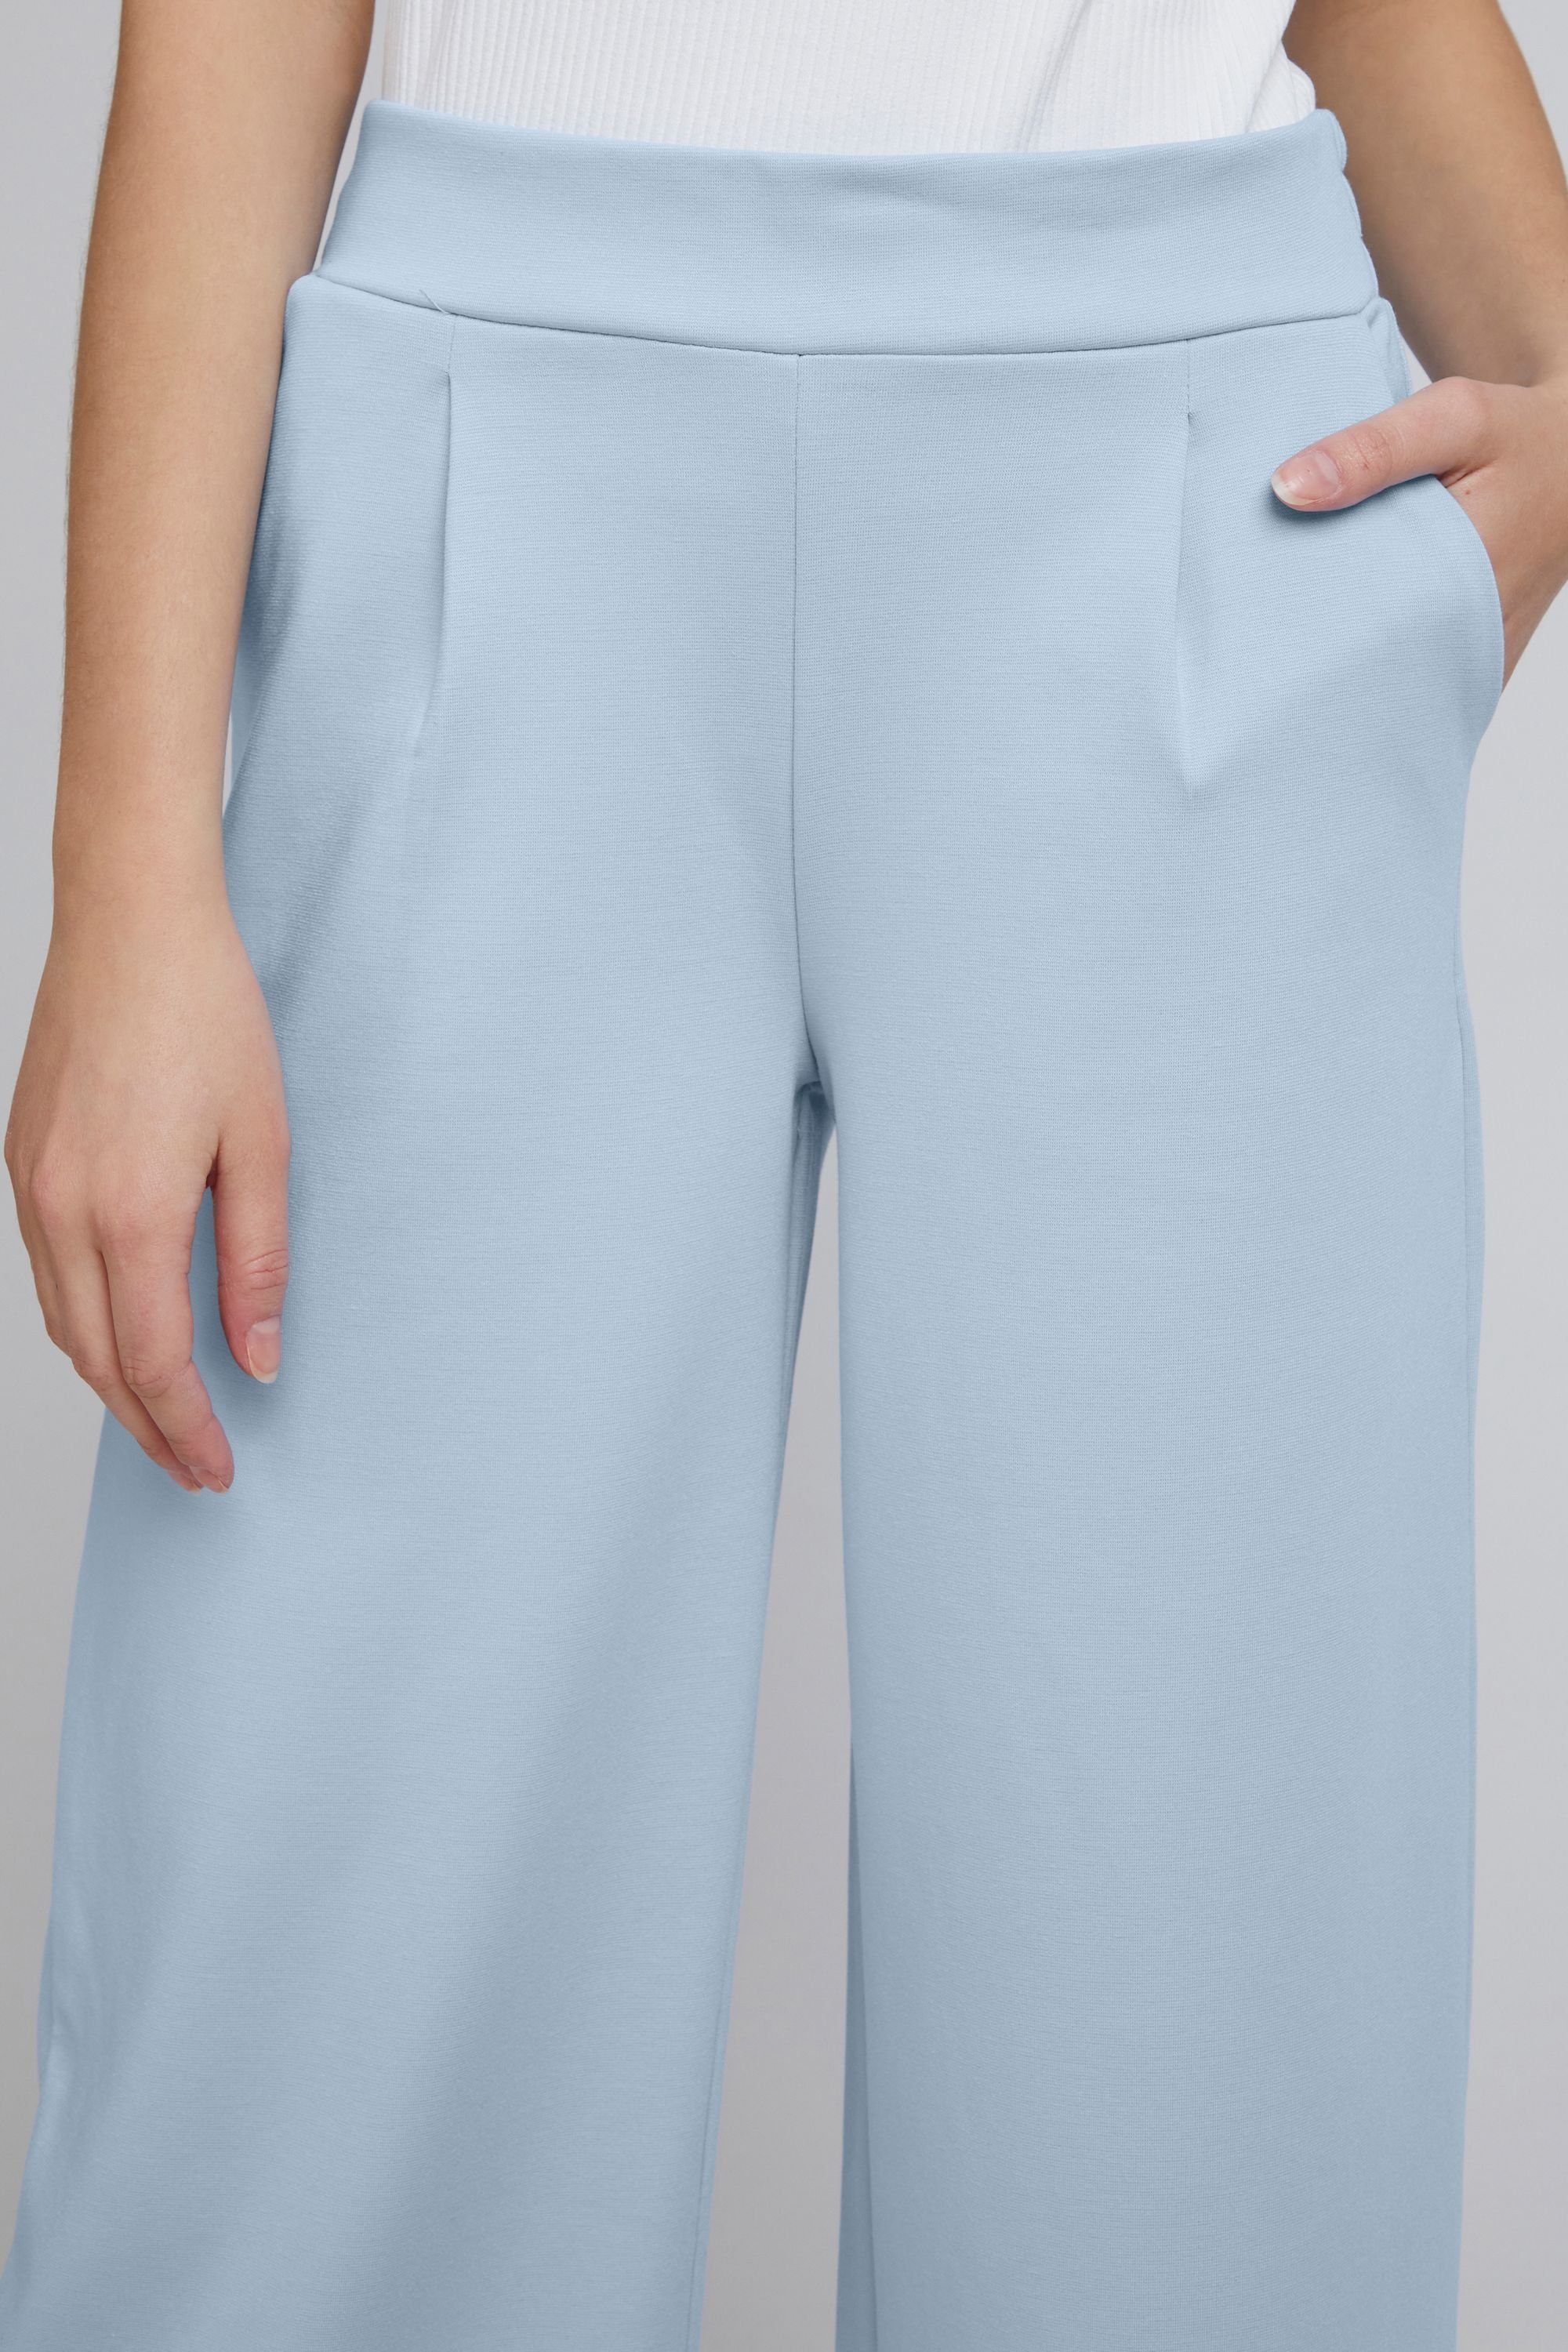 Stoffhose Blue Stoffhose PA - Leger Ichi geschnittene (154030) IHKATE 20116301 WIDE Chambray SUS